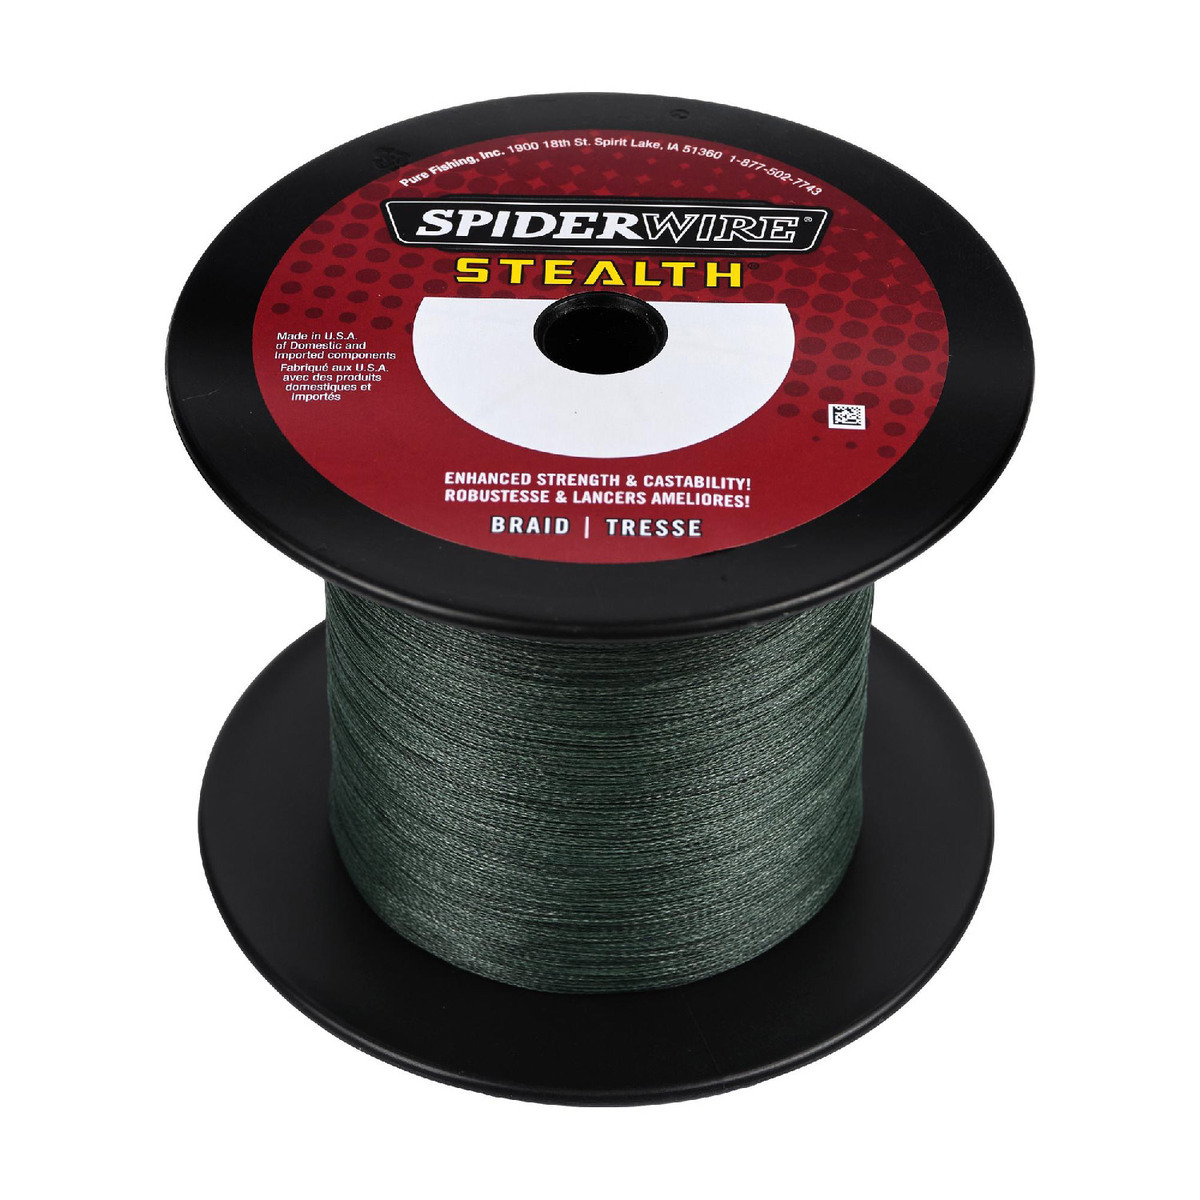 SpiderWire Stealth Braided Fishing Line - 100lb, Moss Green, 500yds